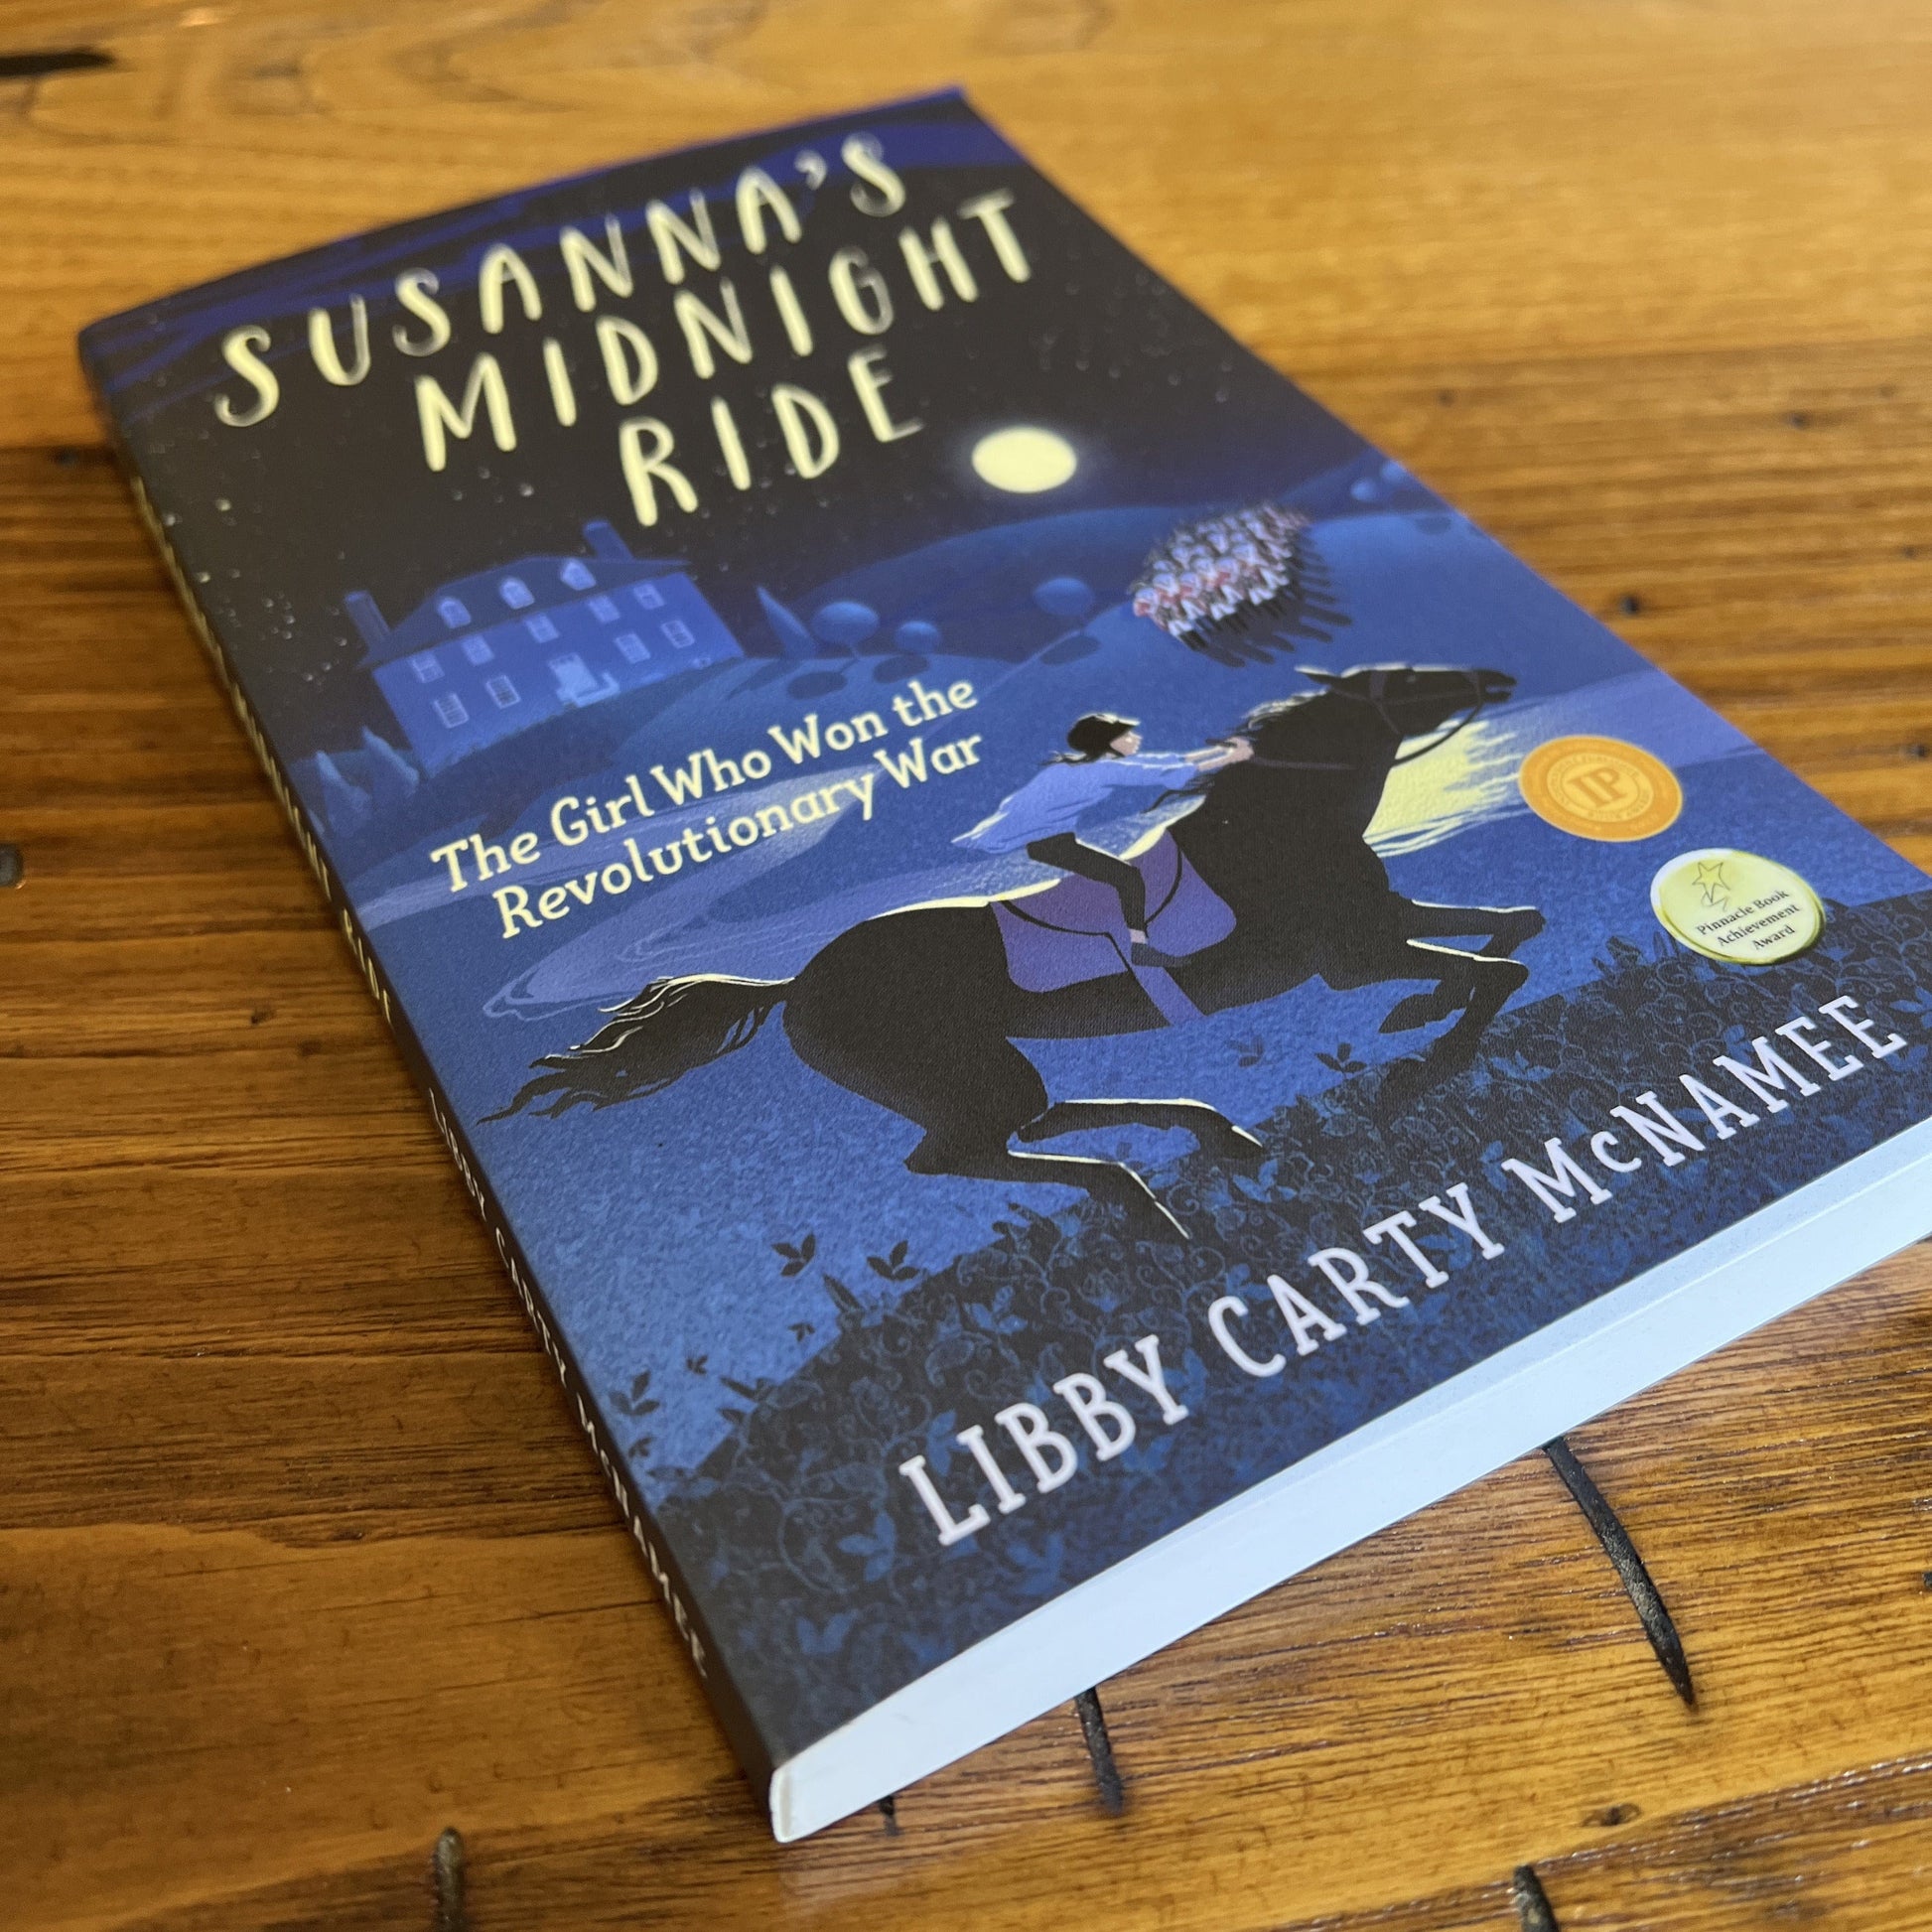 "Susanna's Midnight Ride: The Girl Who Won the Revolutionary War" - Signed by the author, Libby Carty McNamee